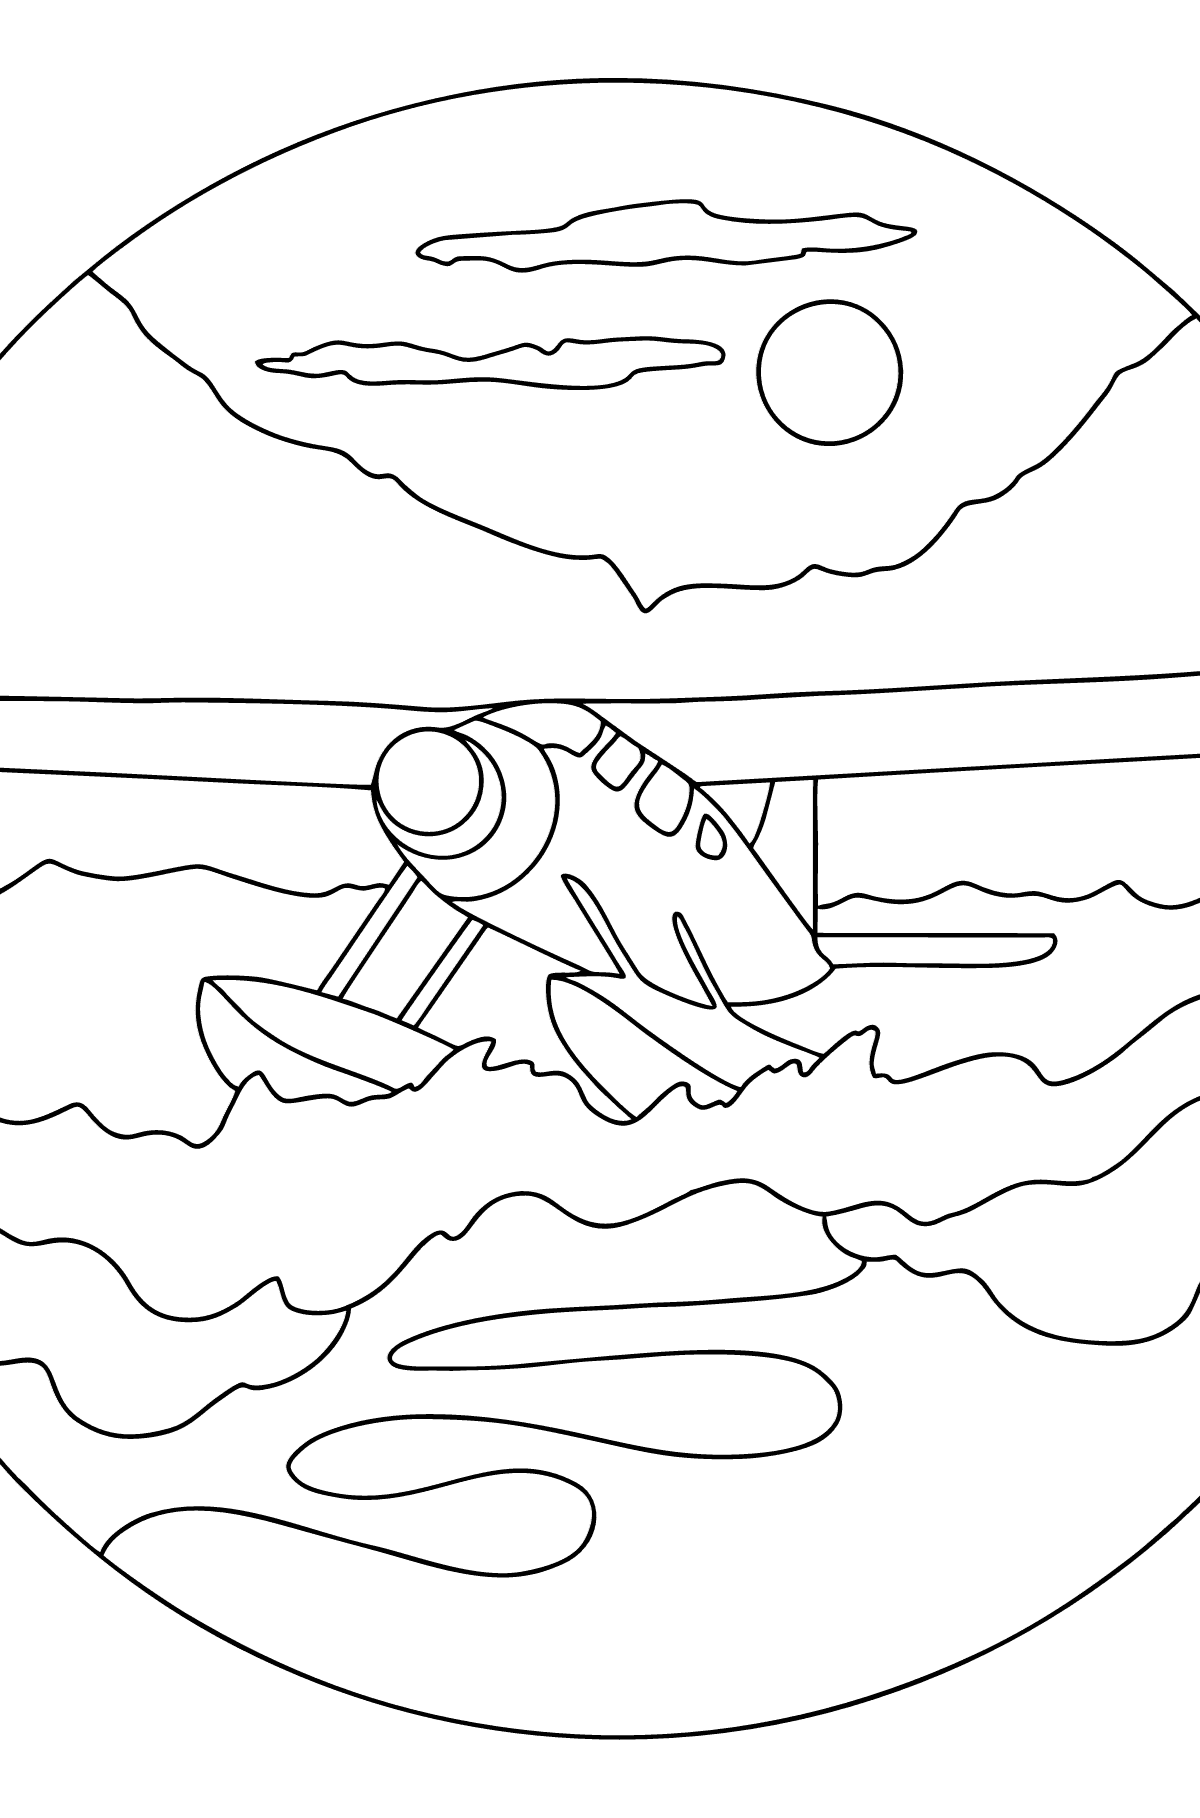 Hydroplane Coloring Page - Coloring Pages for Kids